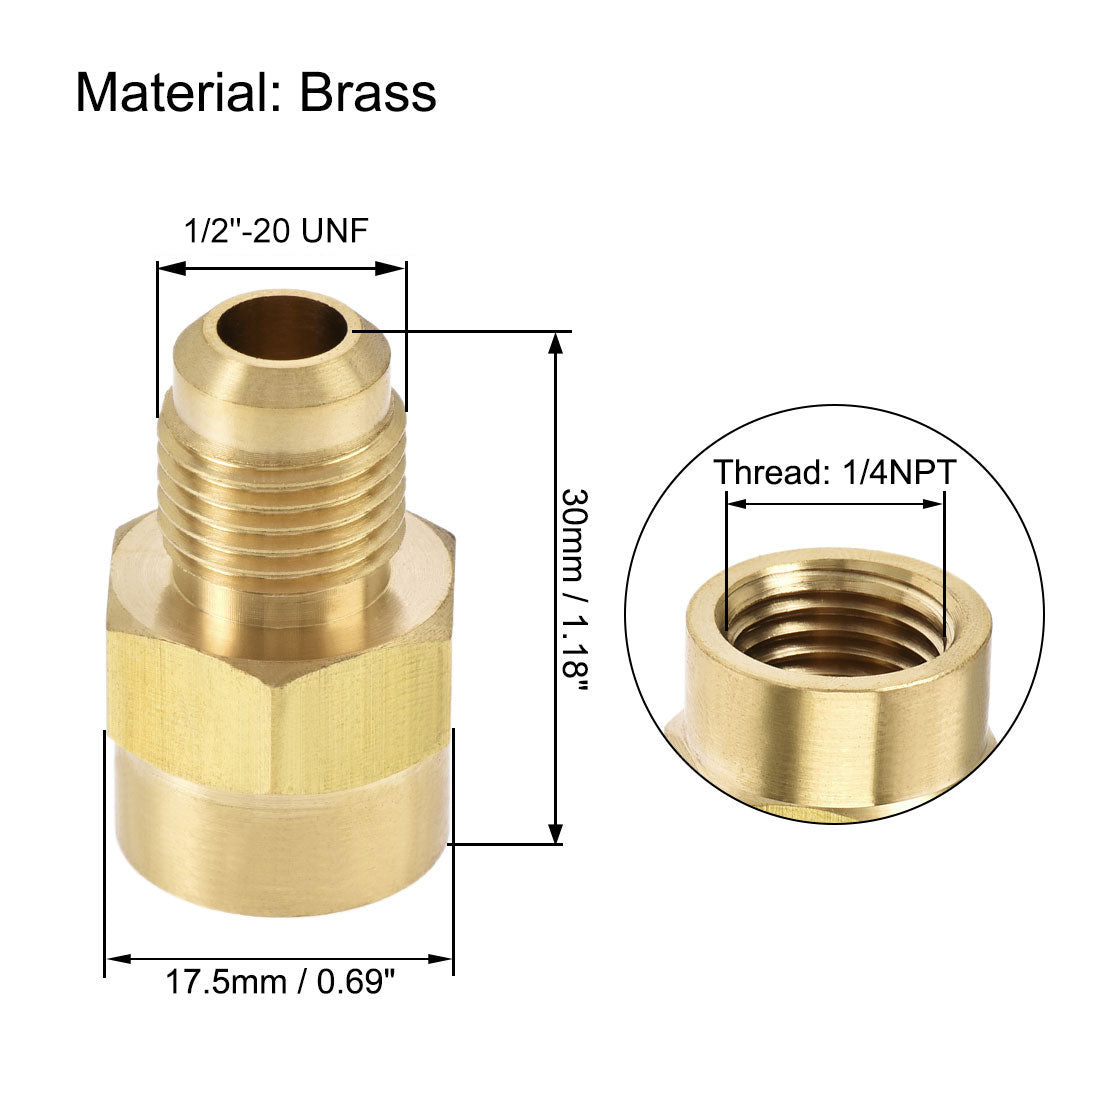 Uxcell Uxcell Brass Pipe Fitting, 5/8-18UNF Flare Male to 1/4NPT Female Thread, Tubing Adapter Hose Connector, for Air Conditioner Refrigeration